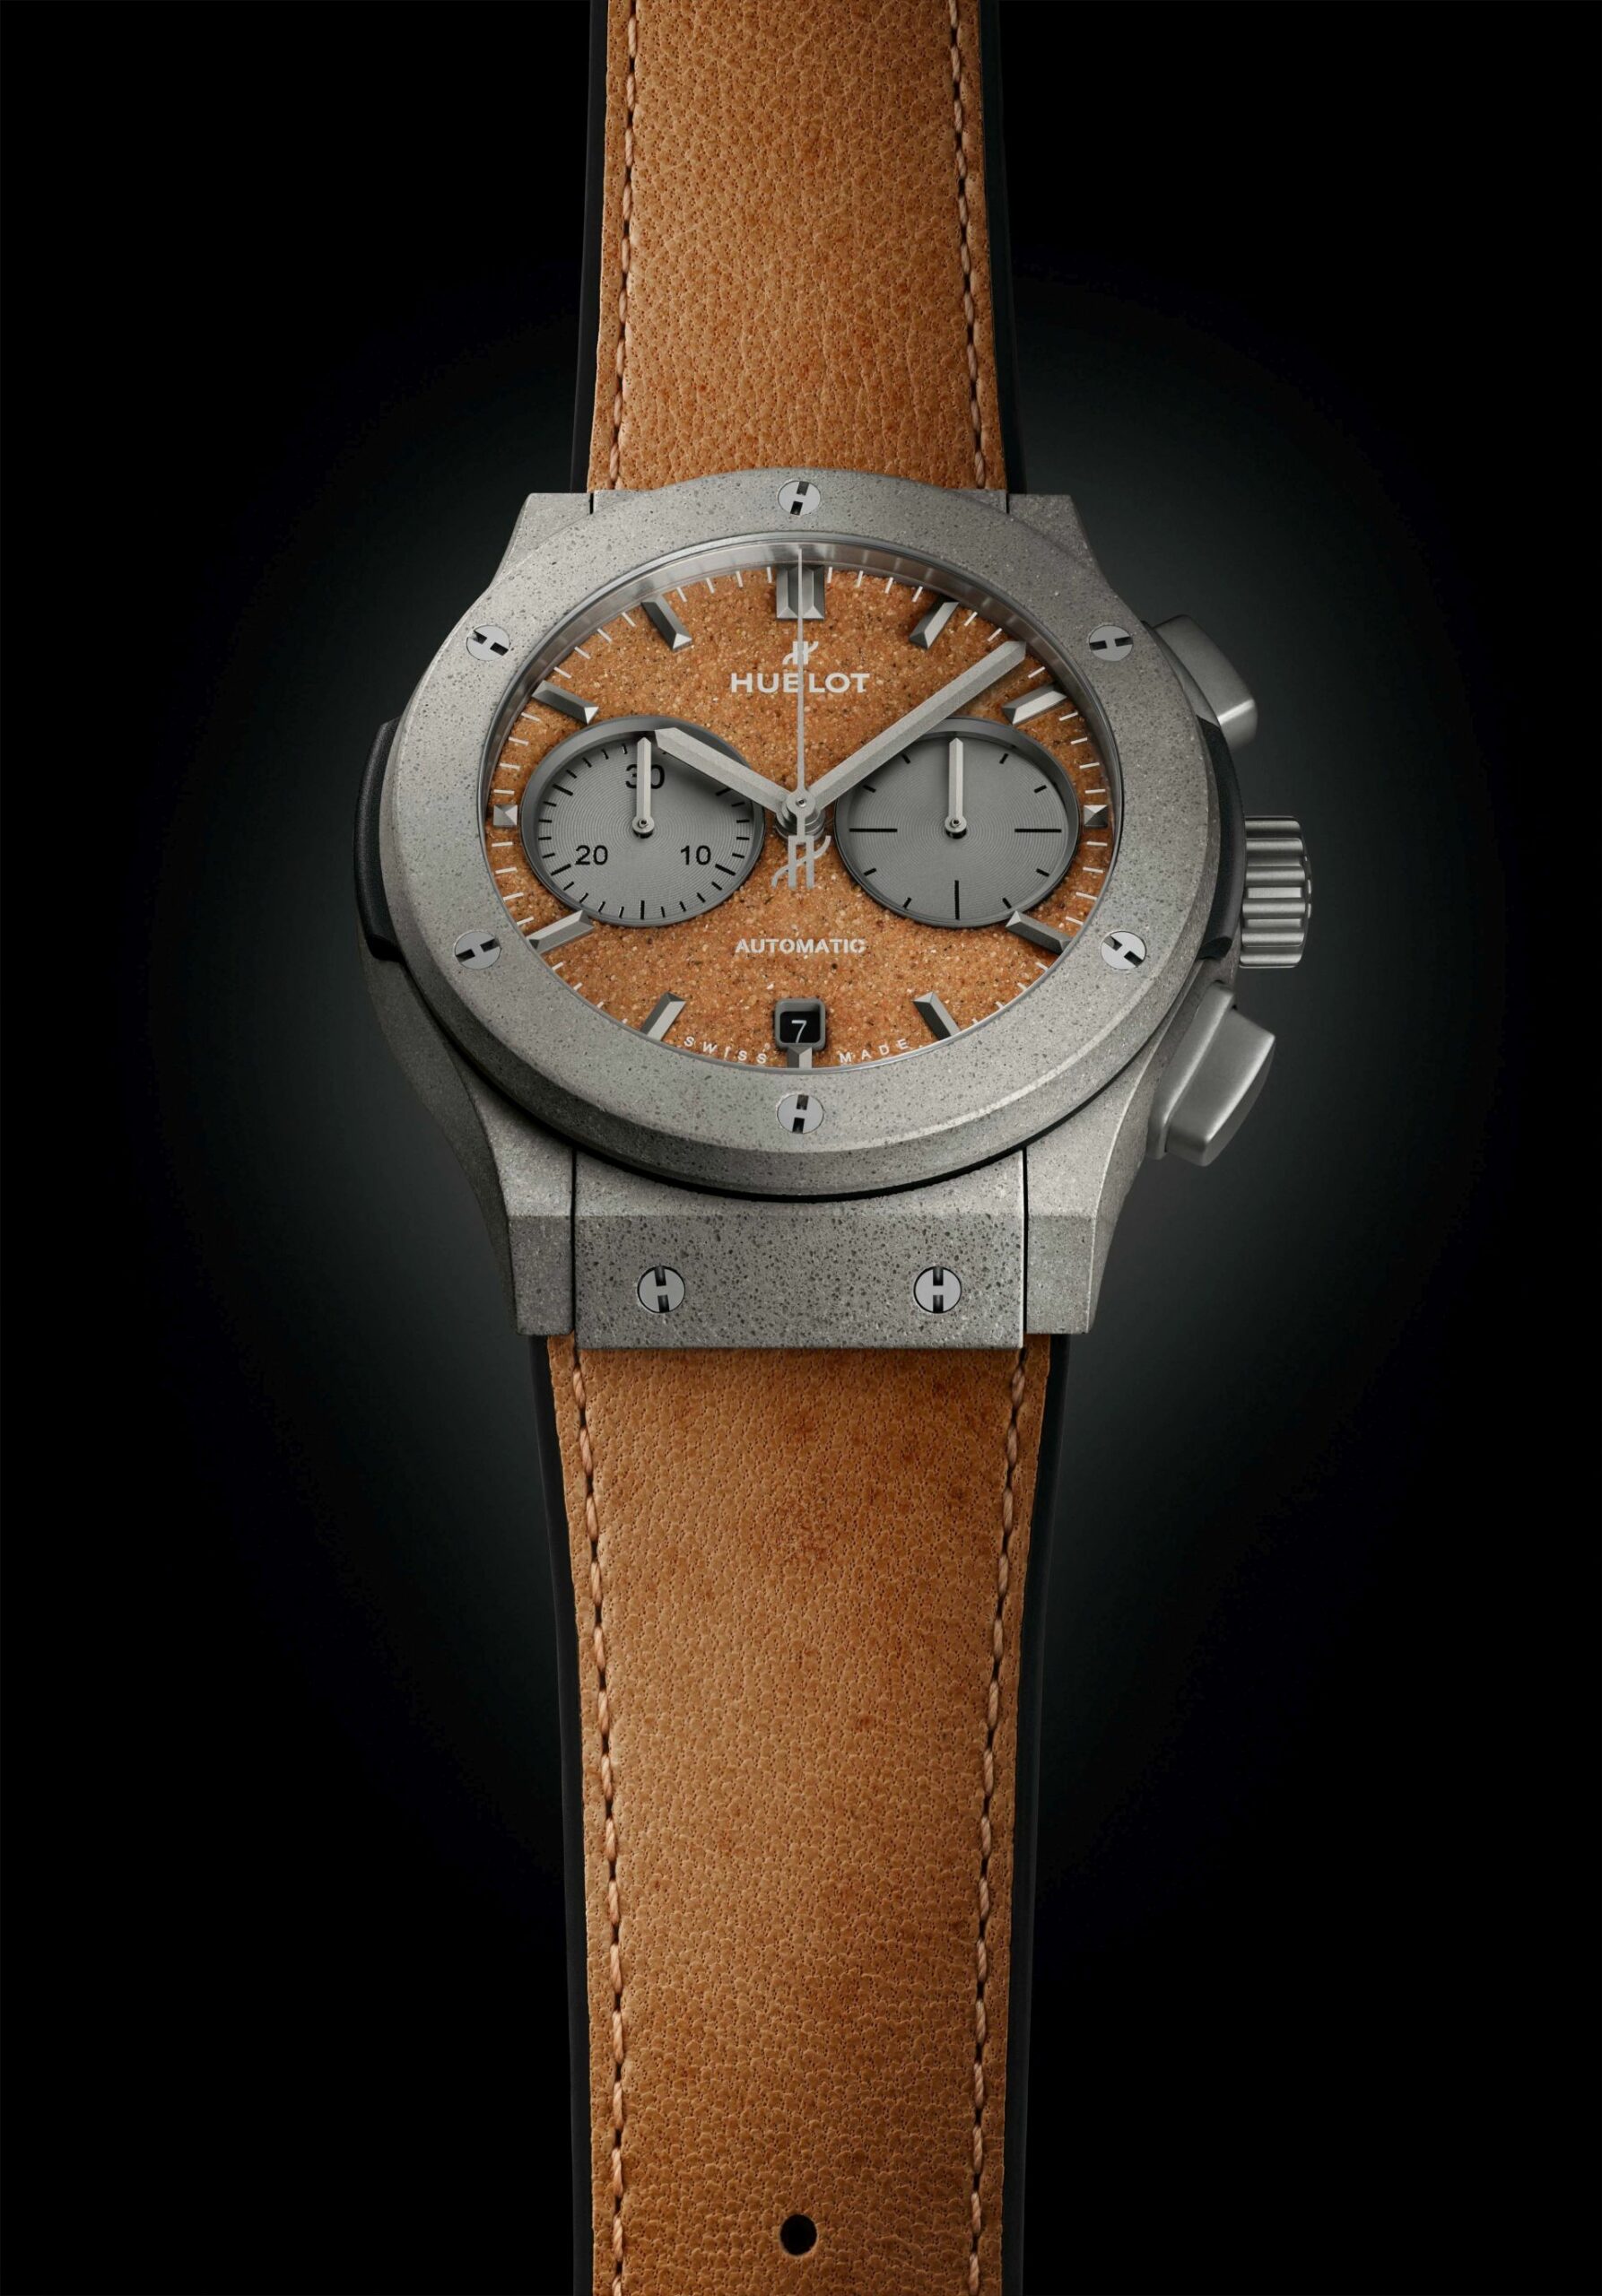 Introducing: The Hublot Classic Fusion Original Limited Edition